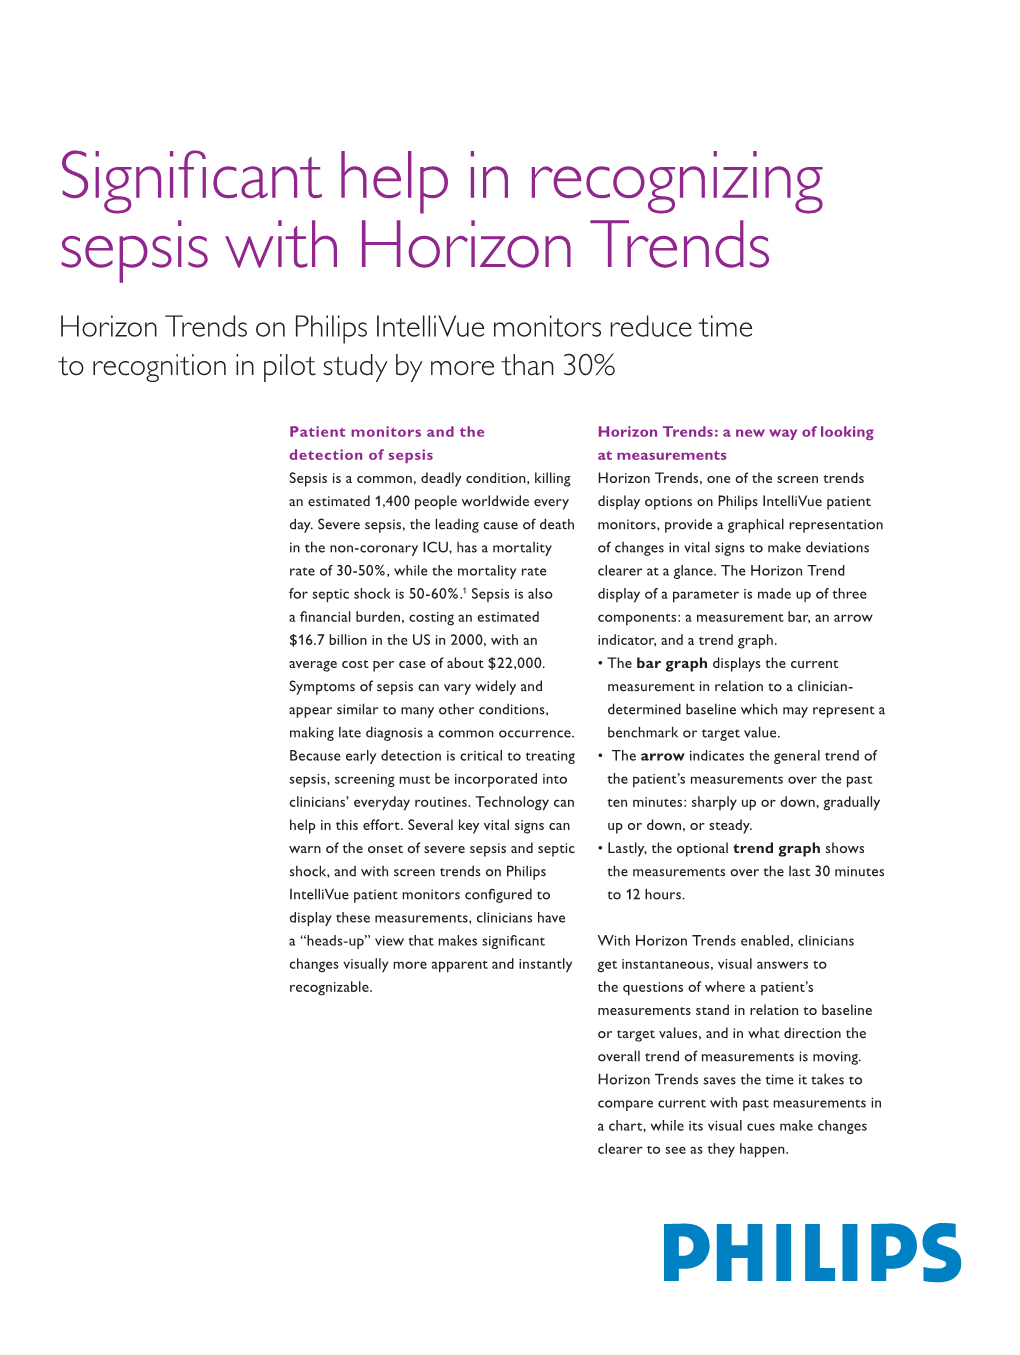 Significant Help in Recognizing Sepsis with Horizon Trends